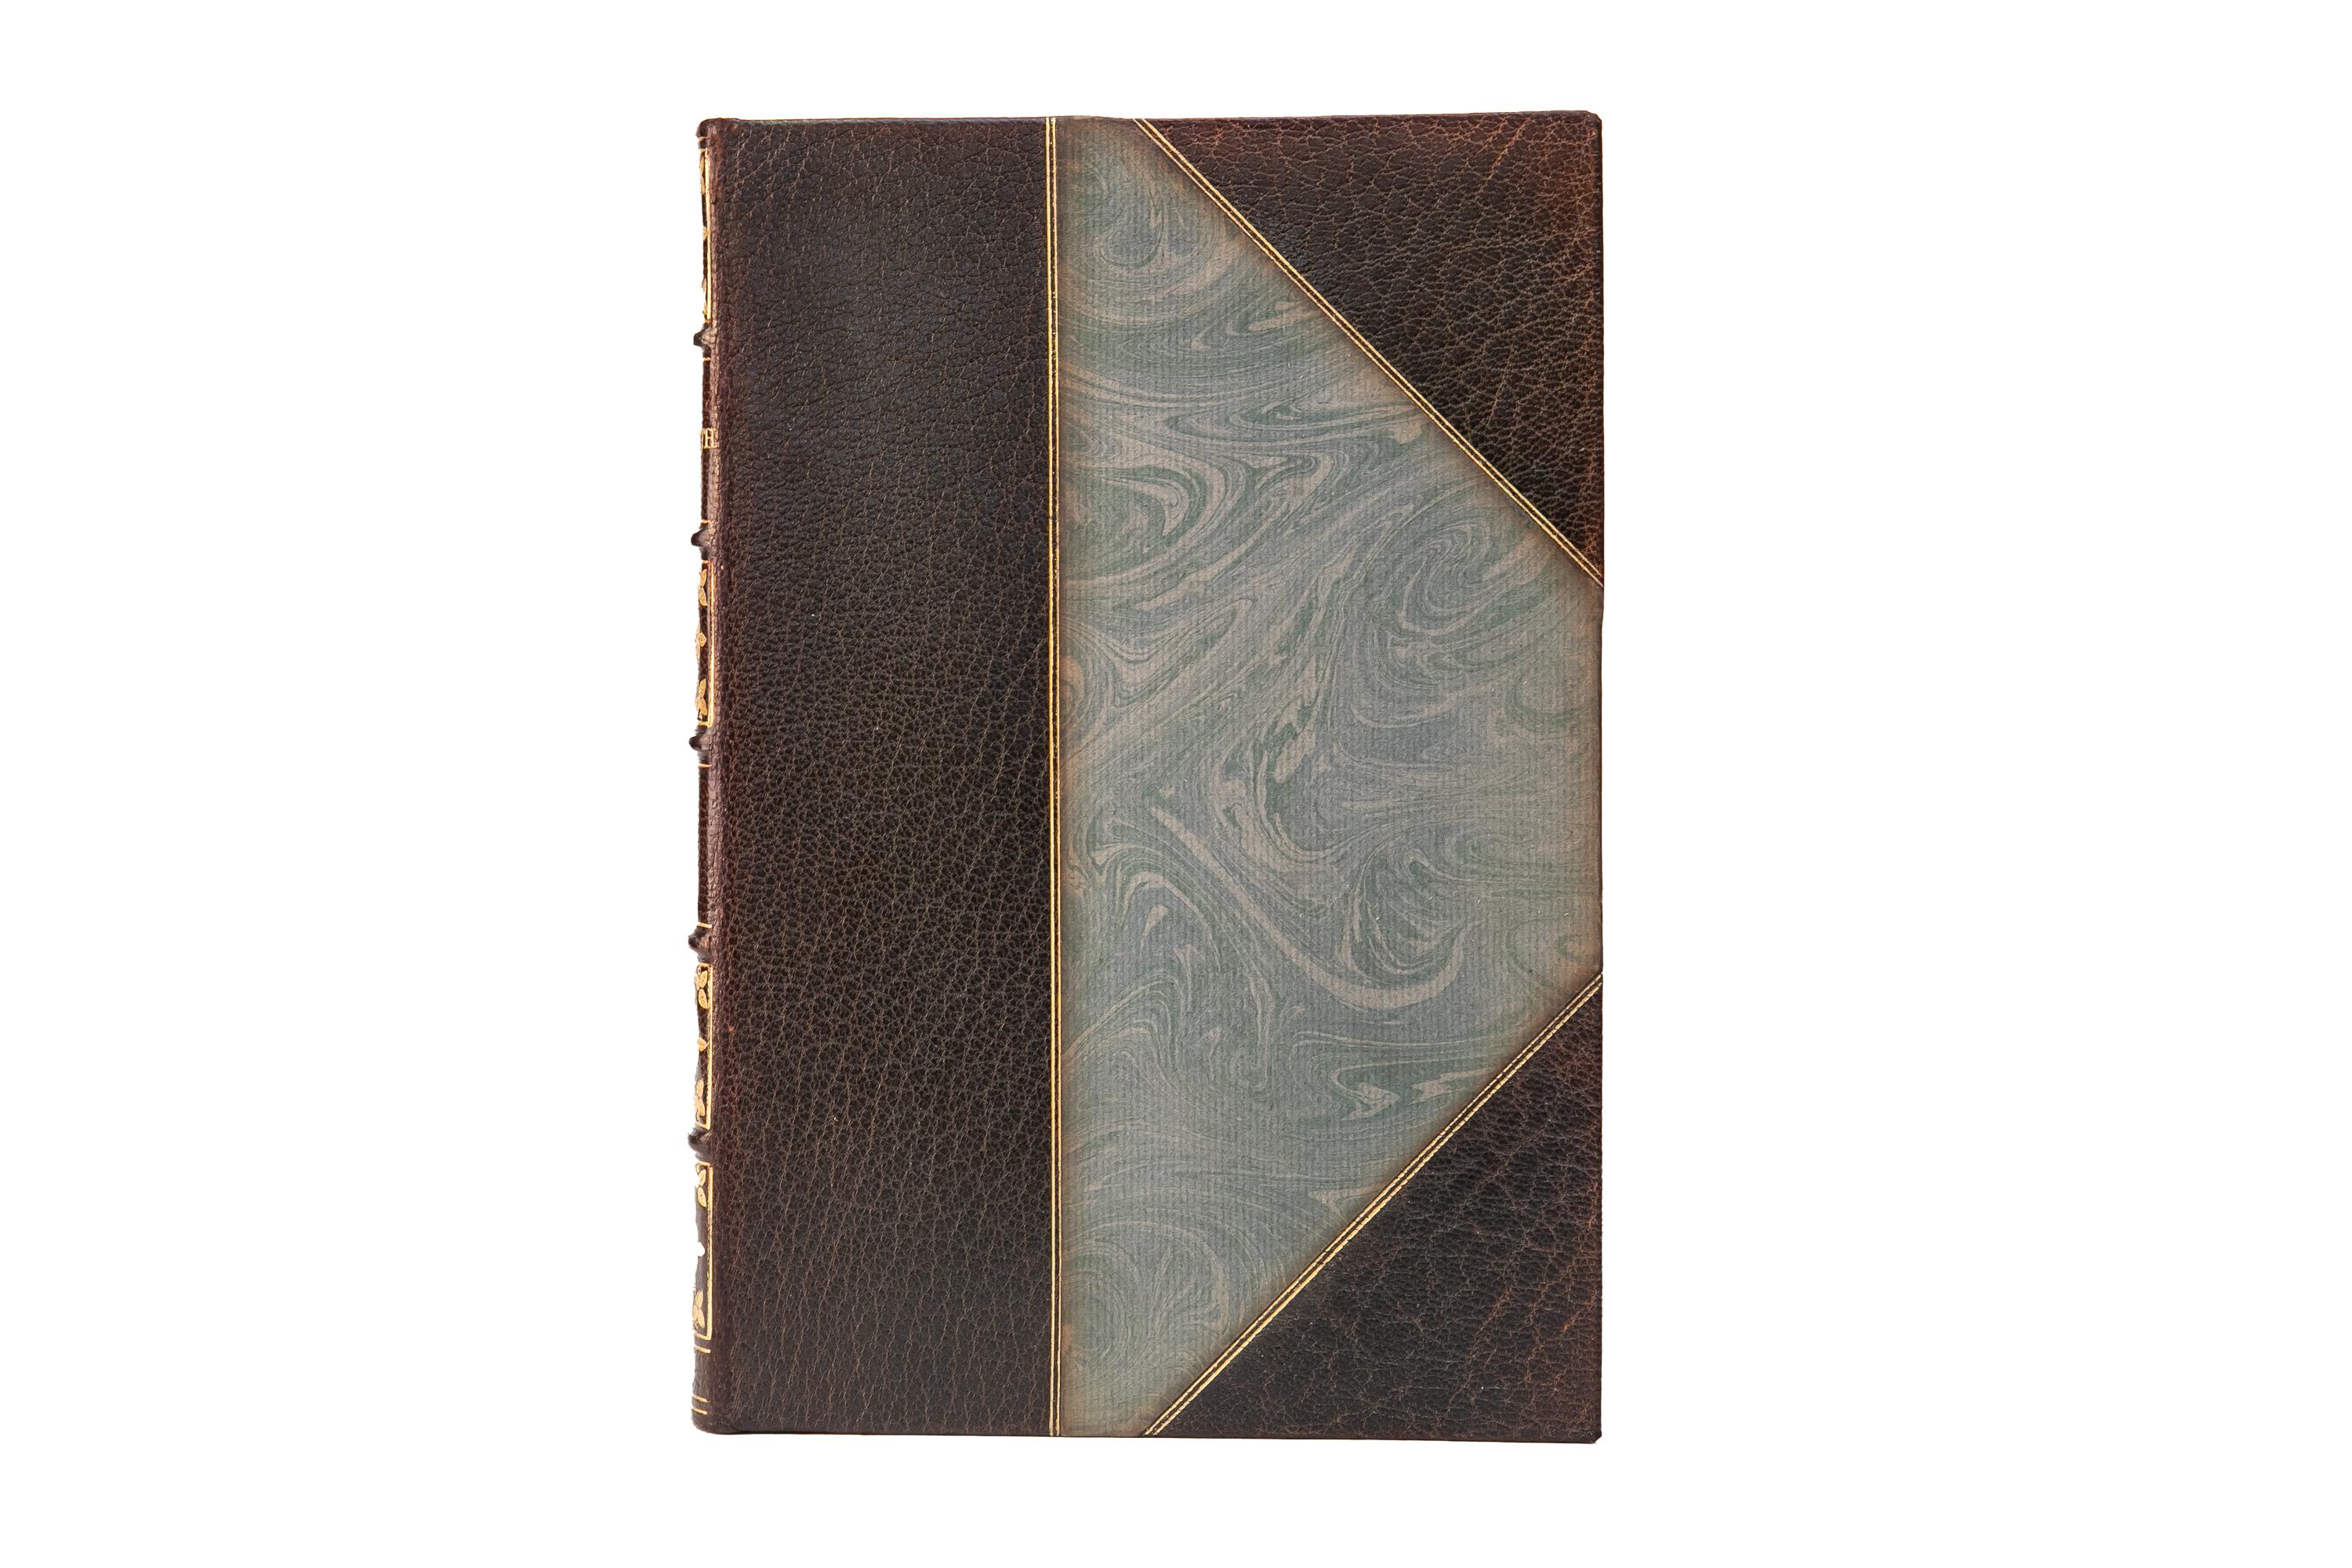 10 Volumes. William Wordsworth, The Complete Poetical Works. Large Paper Edition. Bound in 3/4 brown morocco and marbled boards. The covers and raised band spines are decorated with gilt-tooled detailing. The top edges are gilt with marbled